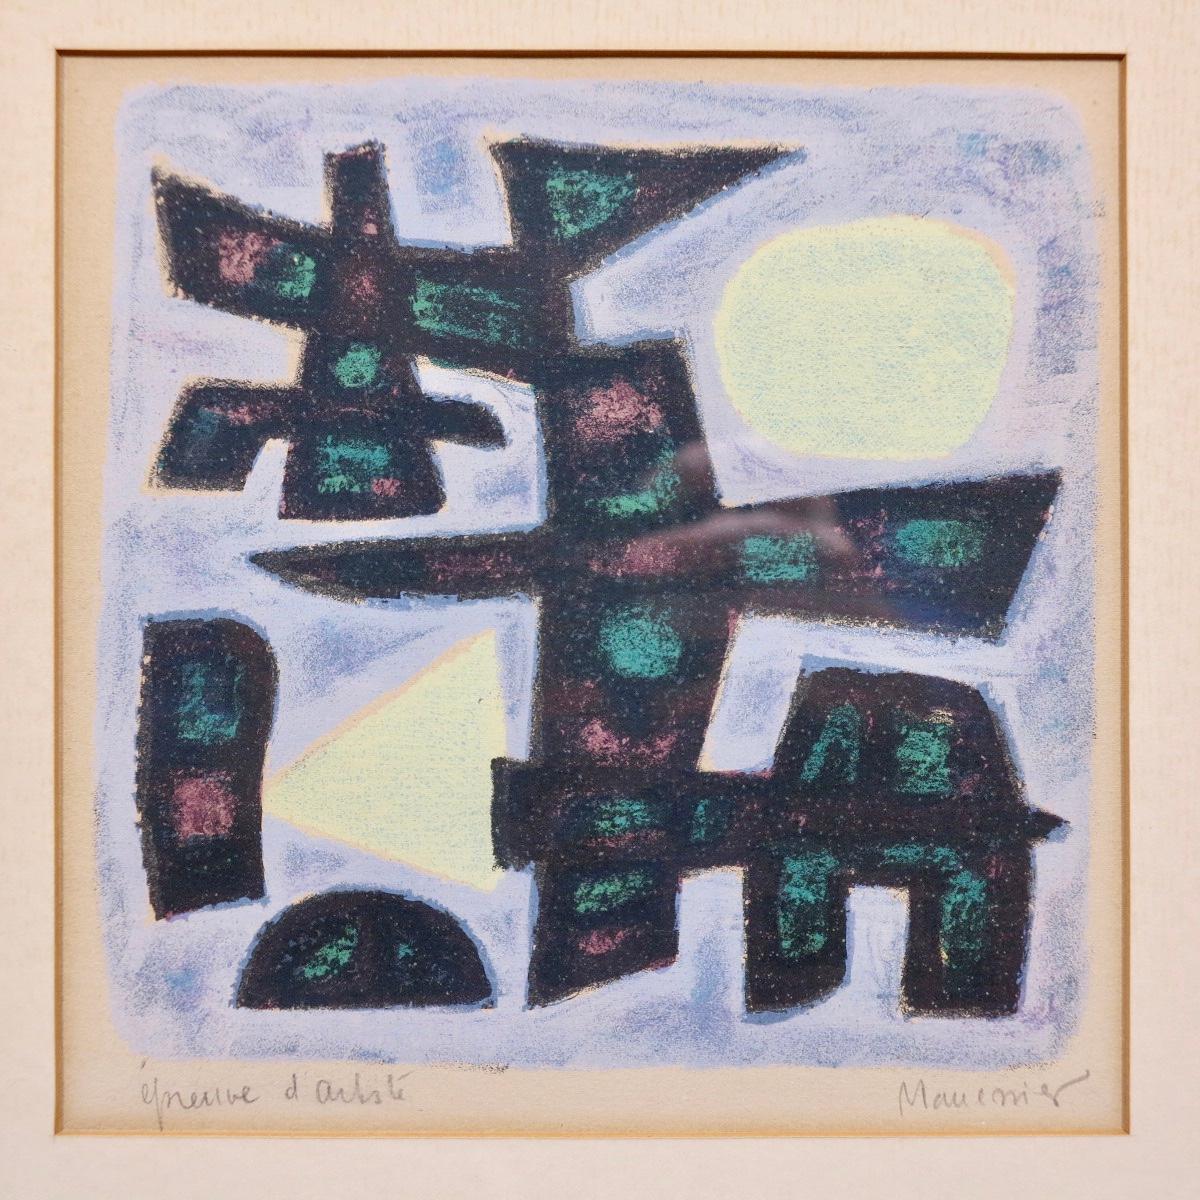 Alfred MANESSIER Abstract Print - Untitled abstract expressionist print